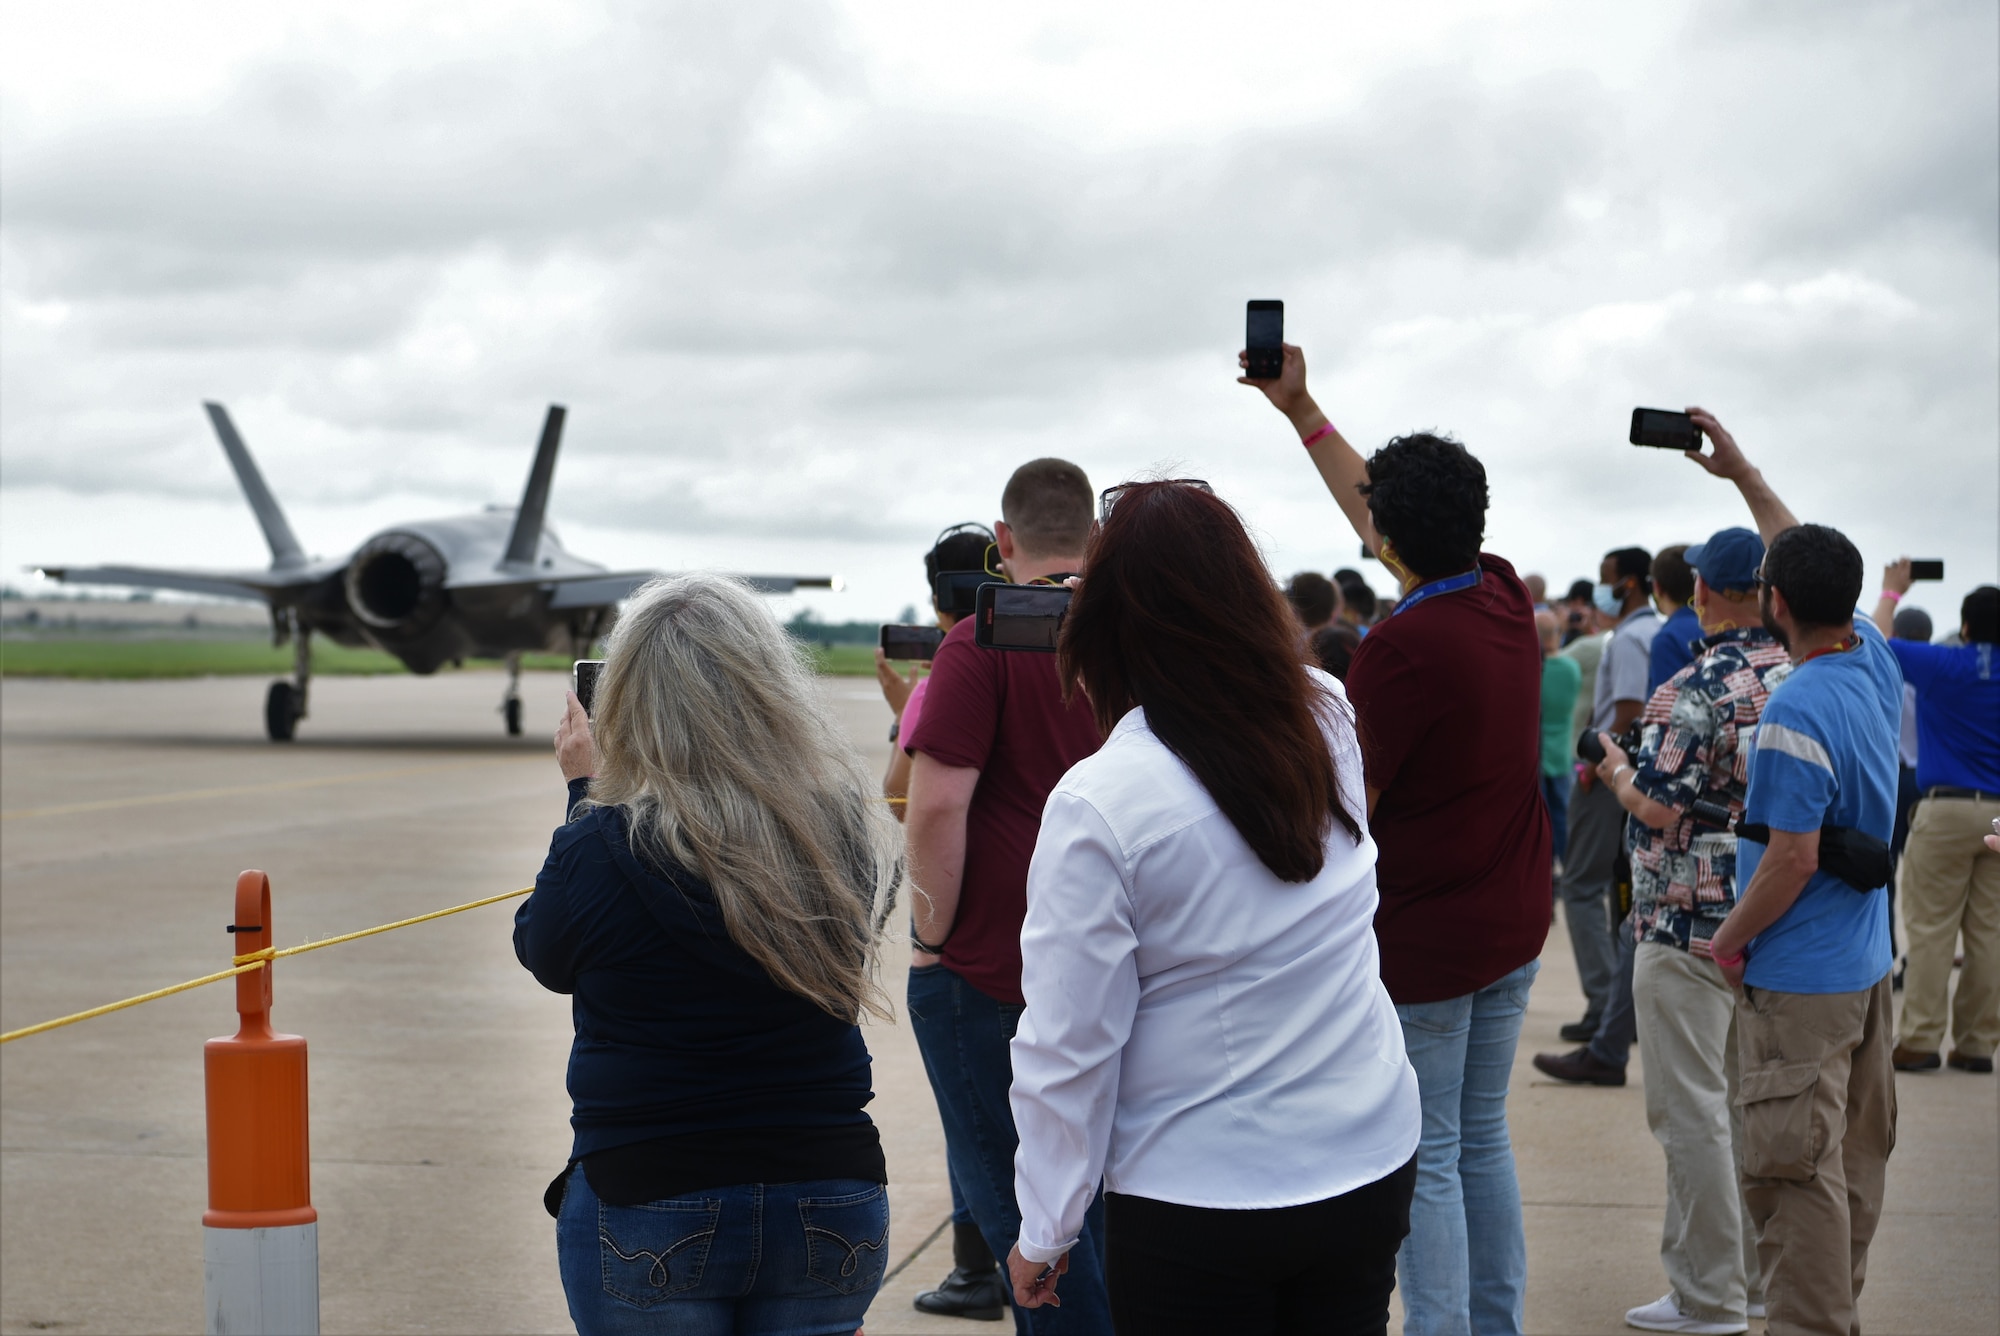 Group of people looking at an aircraft